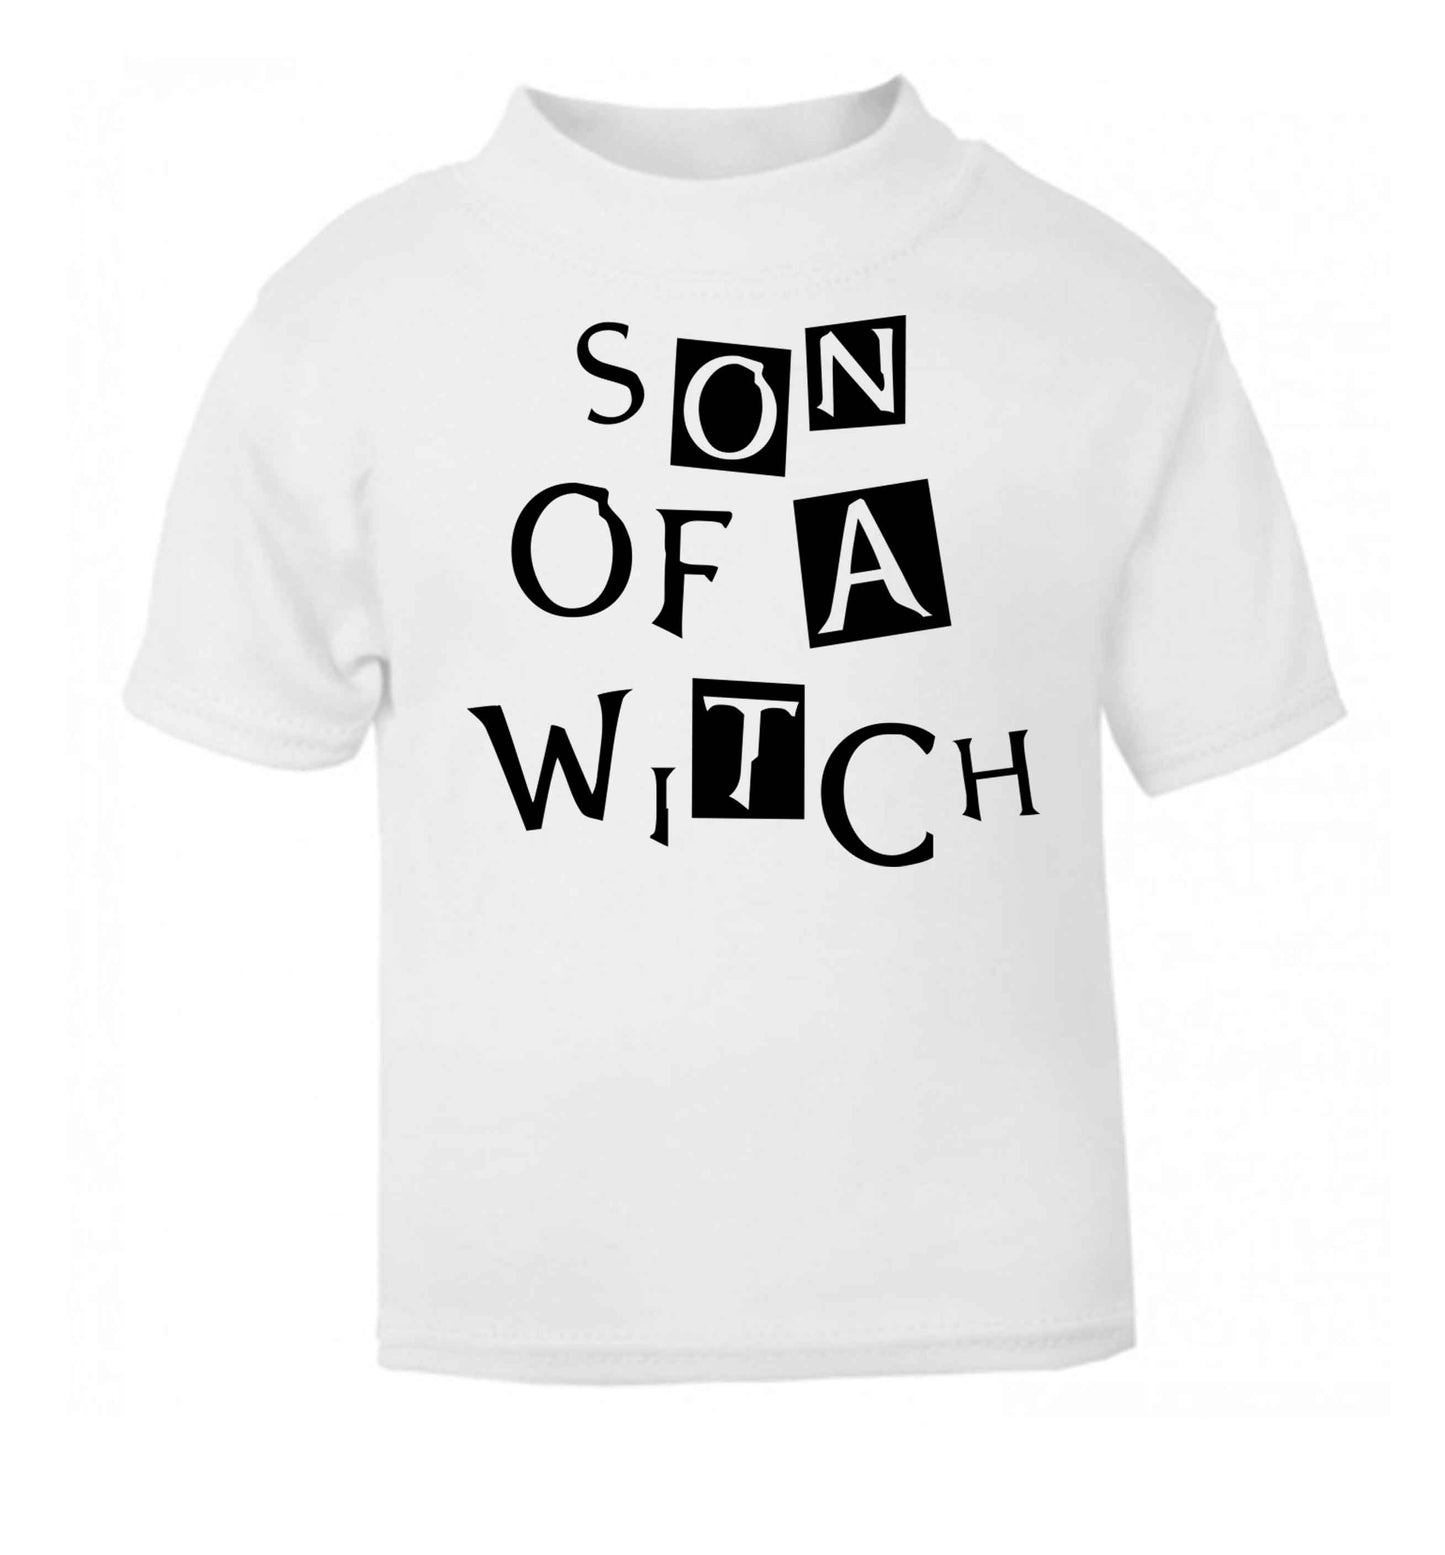 Son of a witch white baby toddler Tshirt 2 Years